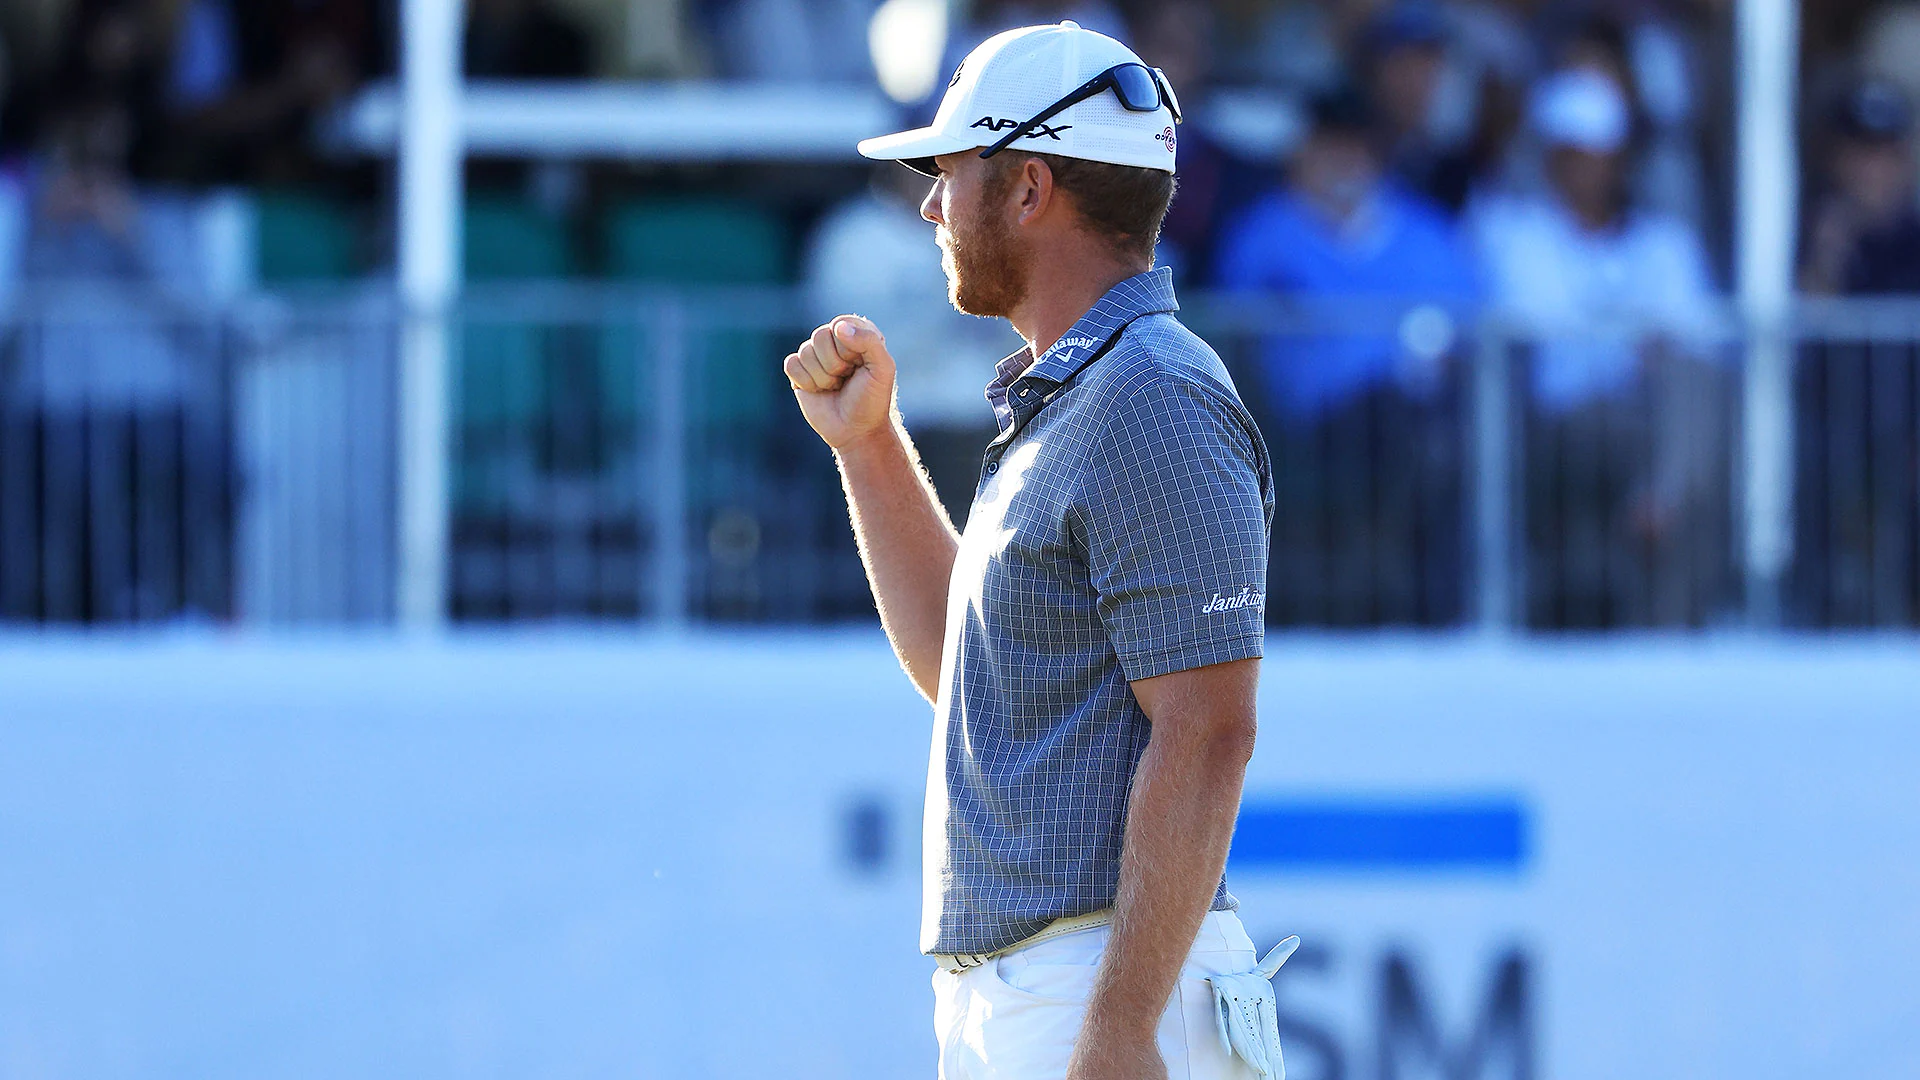 RSM Classic purse payout: What Talor Gooch and Co. earned at Sea Island